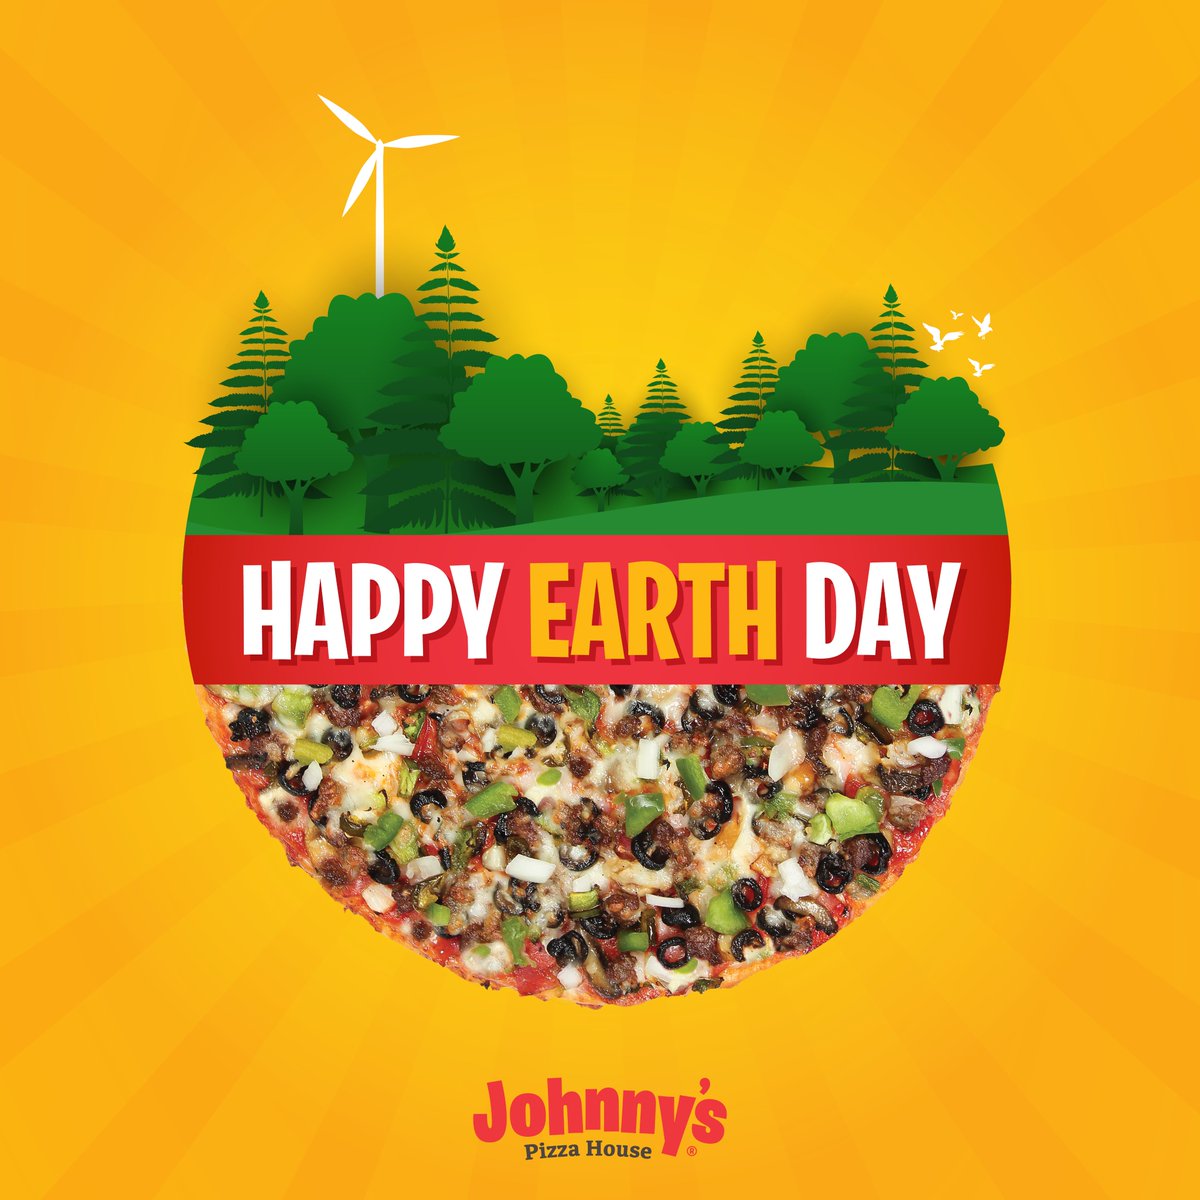 Celebrate #EarthDay with all things round: pizza, cheese sticks, peach puddin pie, cinnamon sticks.... Get your celebration started at johnnysph.com!
#johnnysph #johnnyspizzahouse #pizza #restaurant #employeeowned #esop #localfavorite